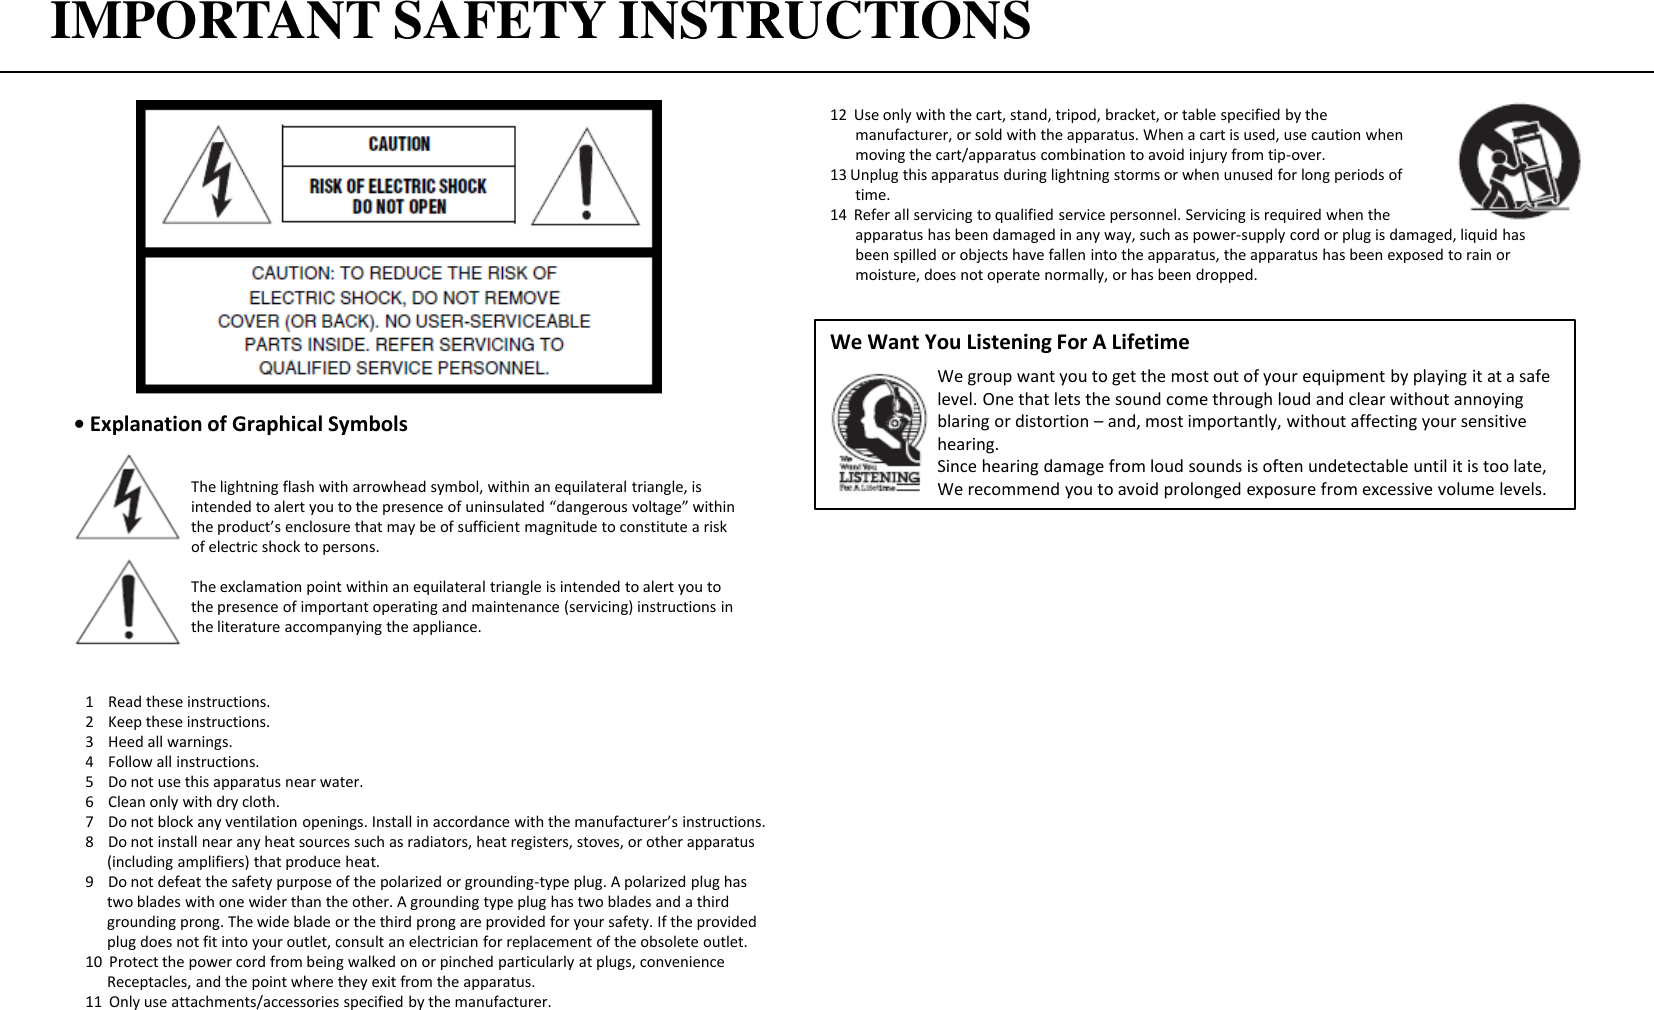 IMPORTANT SAFETY INSTRUCTIONS • Explanation of Graphical Symbols12  Use only with the cart, stand, tripod, bracket, or table specified by the   manufacturer, or sold with the apparatus. When a cart is used, use caution when        moving the cart/apparatus combination to avoid injury from tip-over. 13 Unplug this apparatus during lightning storms or when unused for long periods of   time. 14  Refer all servicing to qualified service personnel. Servicing is required when the   apparatus has been damaged in any way, such as power-supply cord or plug is damaged, liquid has   been spilled or objects have fallen into the apparatus, the apparatus has been exposed to rain or   moisture, does not operate normally, or has been dropped. We Want You Listening For A Lifetime    We group want you to get the most out of your equipment by playing it at a safe    level. One that lets the sound come through loud and clear without annoying    blaring or distortion – and, most importantly, without affecting your sensitive    hearing.    Since hearing damage from loud sounds is often undetectable until it is too late,     We recommend you to avoid prolonged exposure from excessive volume levels. The lightning flash with arrowhead symbol, within an equilateral triangle, is intended to alert you to the presence of uninsulated “dangerous voltage” within the product’s enclosure that may be of sufficient magnitude to constitute a risk of electric shock to persons. The exclamation point within an equilateral triangle is intended to alert you to the presence of important operating and maintenance (servicing) instructions in the literature accompanying the appliance. 1    Read these instructions. 2    Keep these instructions. 3    Heed all warnings. 4    Follow all instructions. 5    Do not use this apparatus near water. 6    Clean only with dry cloth. 7    Do not block any ventilation openings. Install in accordance with the manufacturer’s instructions. 8    Do not install near any heat sources such as radiators, heat registers, stoves, or other apparatus       (including amplifiers) that produce heat. 9    Do not defeat the safety purpose of the polarized or grounding-type plug. A polarized plug has    two blades with one wider than the other. A grounding type plug has two blades and a third    grounding prong. The wide blade or the third prong are provided for your safety. If the provided    plug does not fit into your outlet, consult an electrician for replacement of the obsolete outlet. 10  Protect the power cord from being walked on or pinched particularly at plugs, convenience       Receptacles, and the point where they exit from the apparatus. 11  Only use attachments/accessories specified by the manufacturer. 